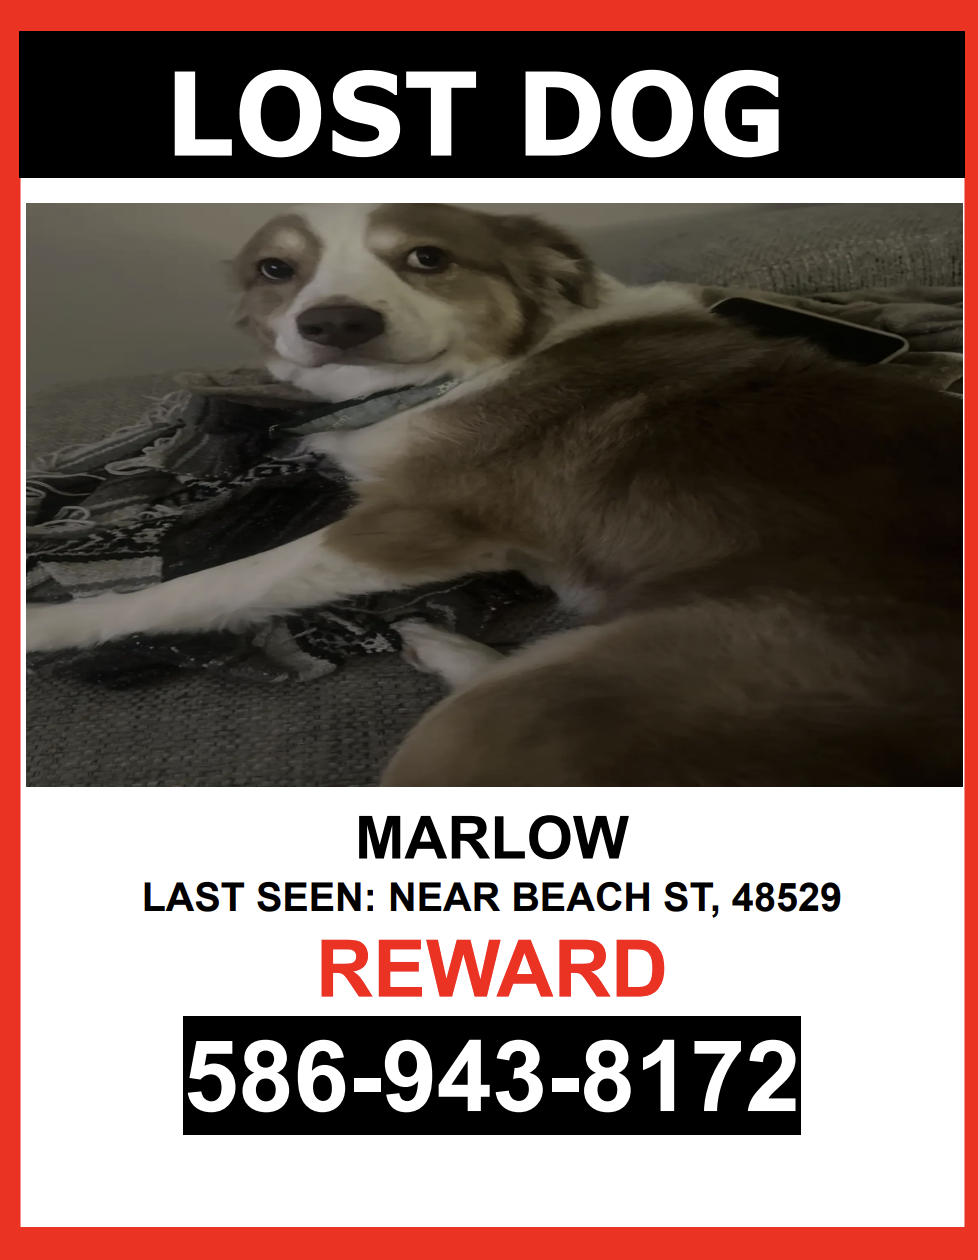 Image of Marlow, Lost Dog